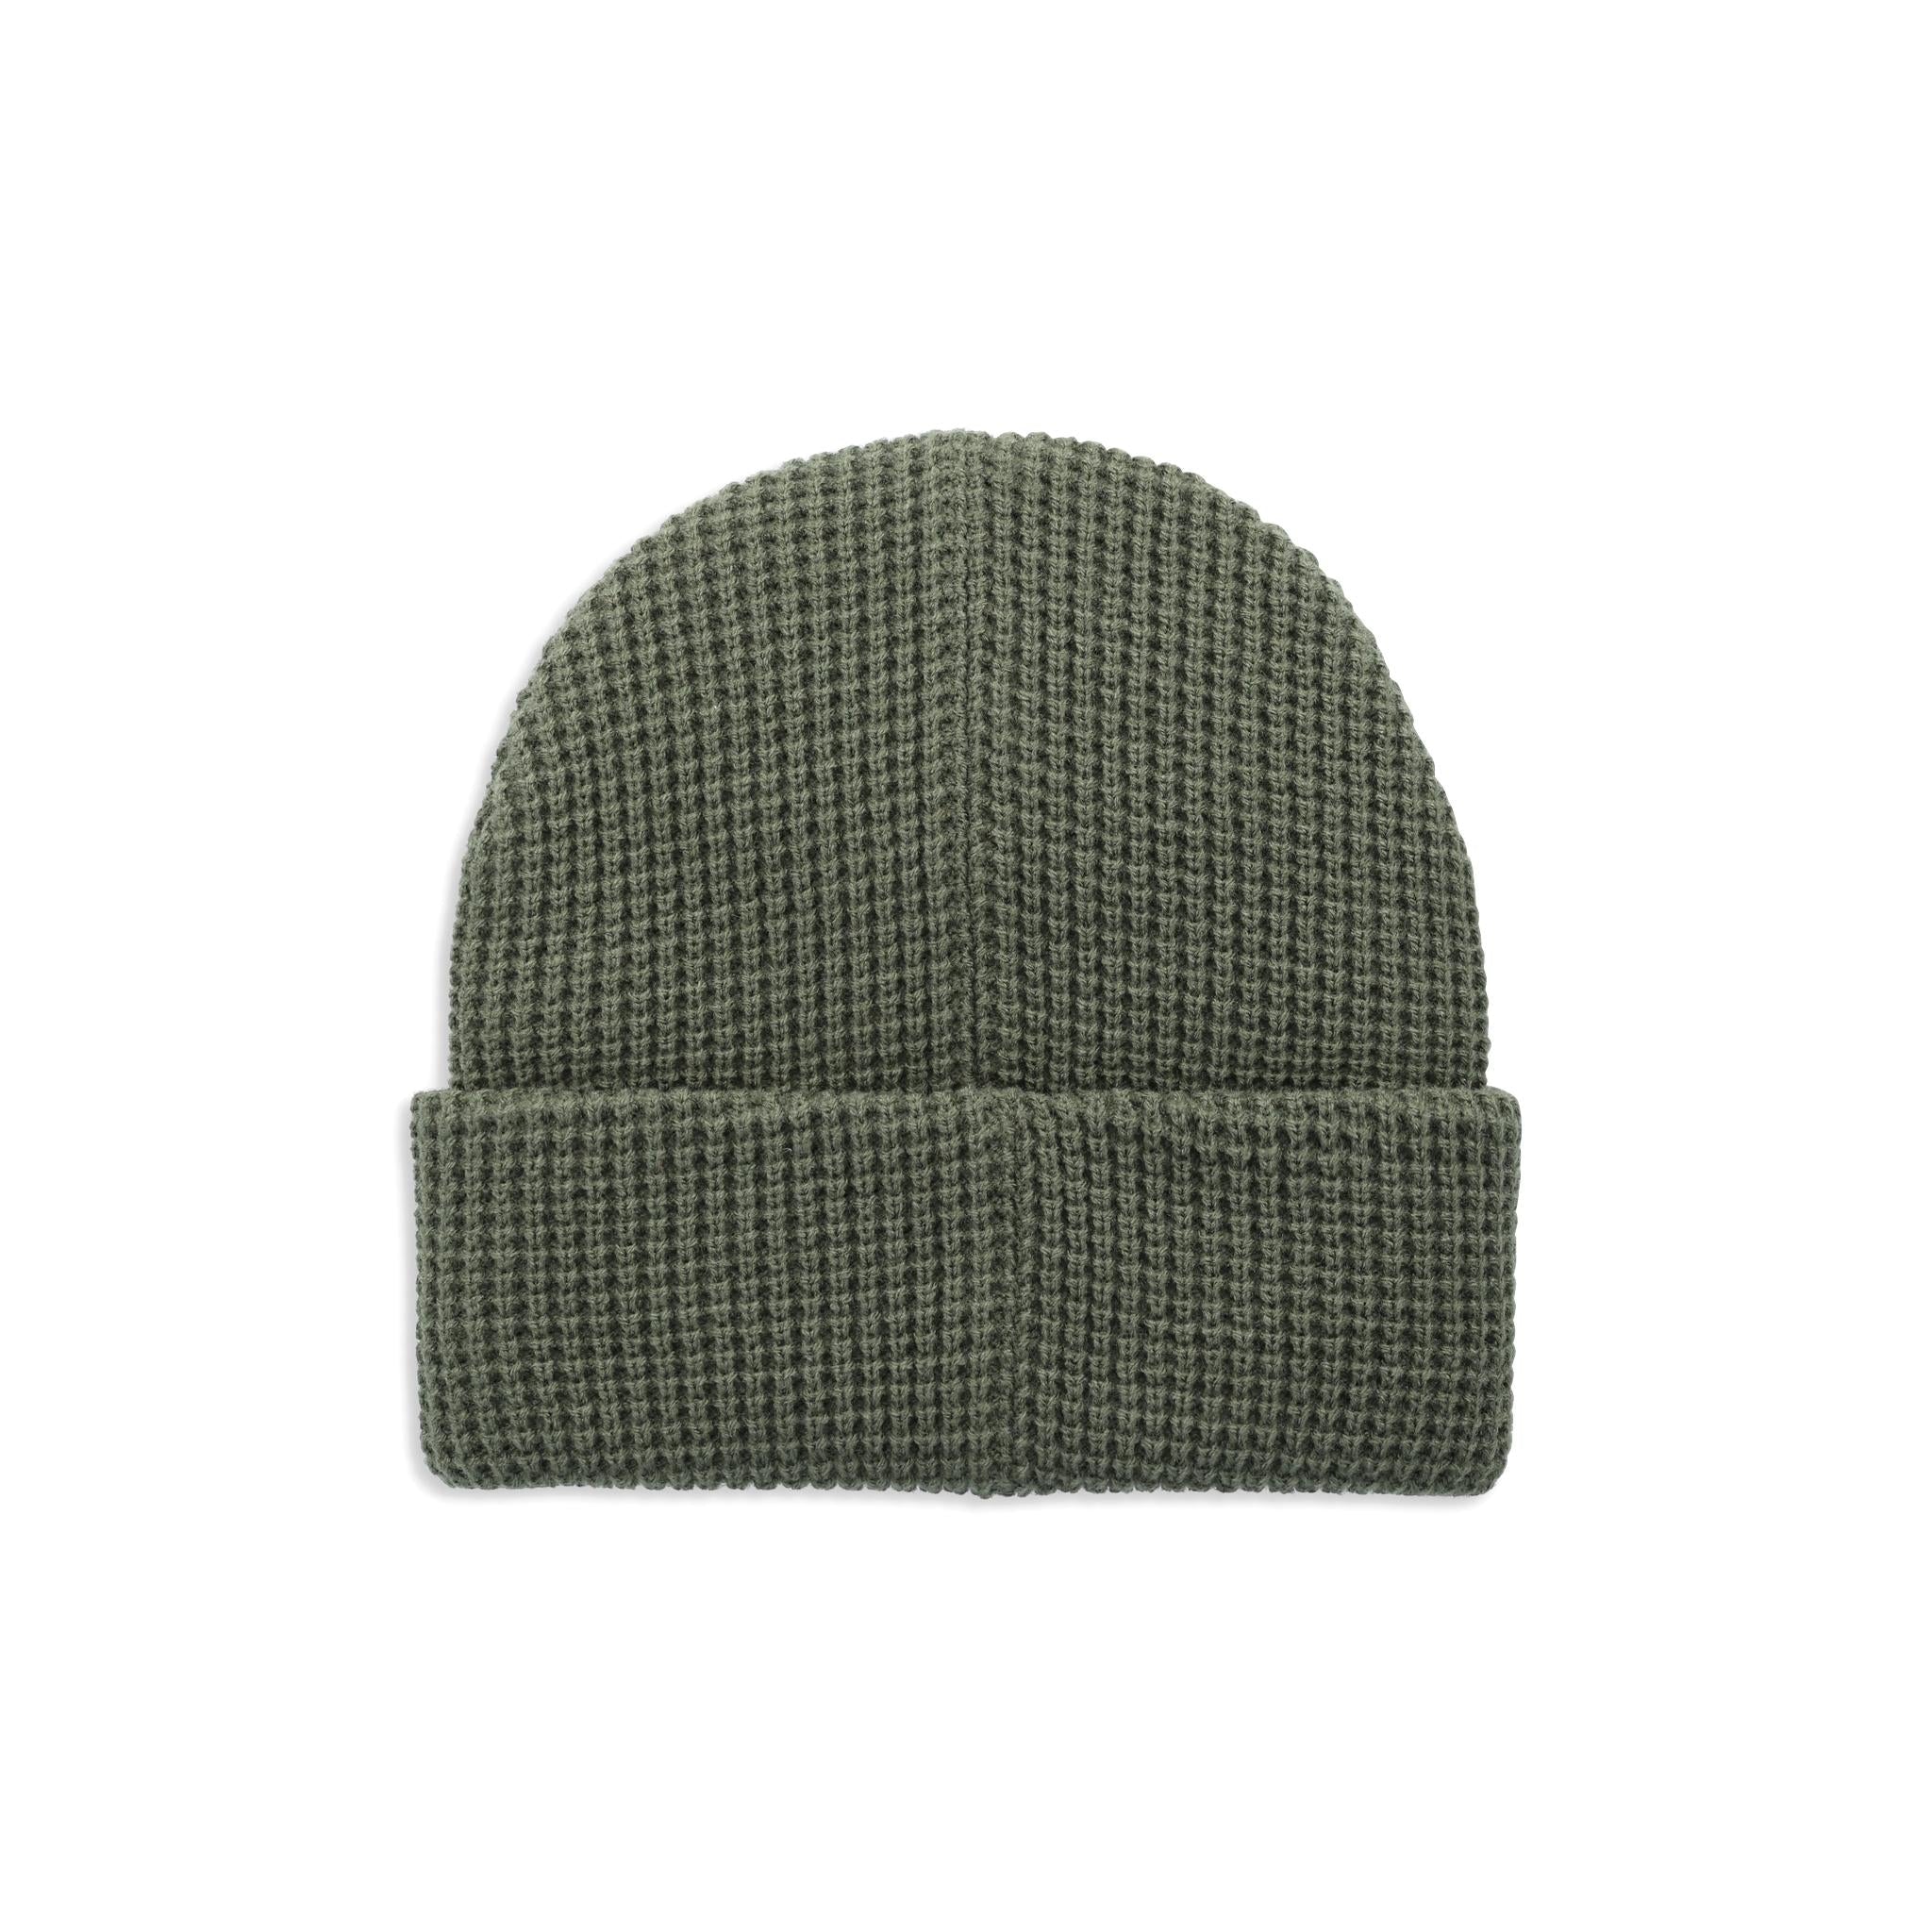 Back View of Topo Designs Waffle Knit Beanie in "Beetle"